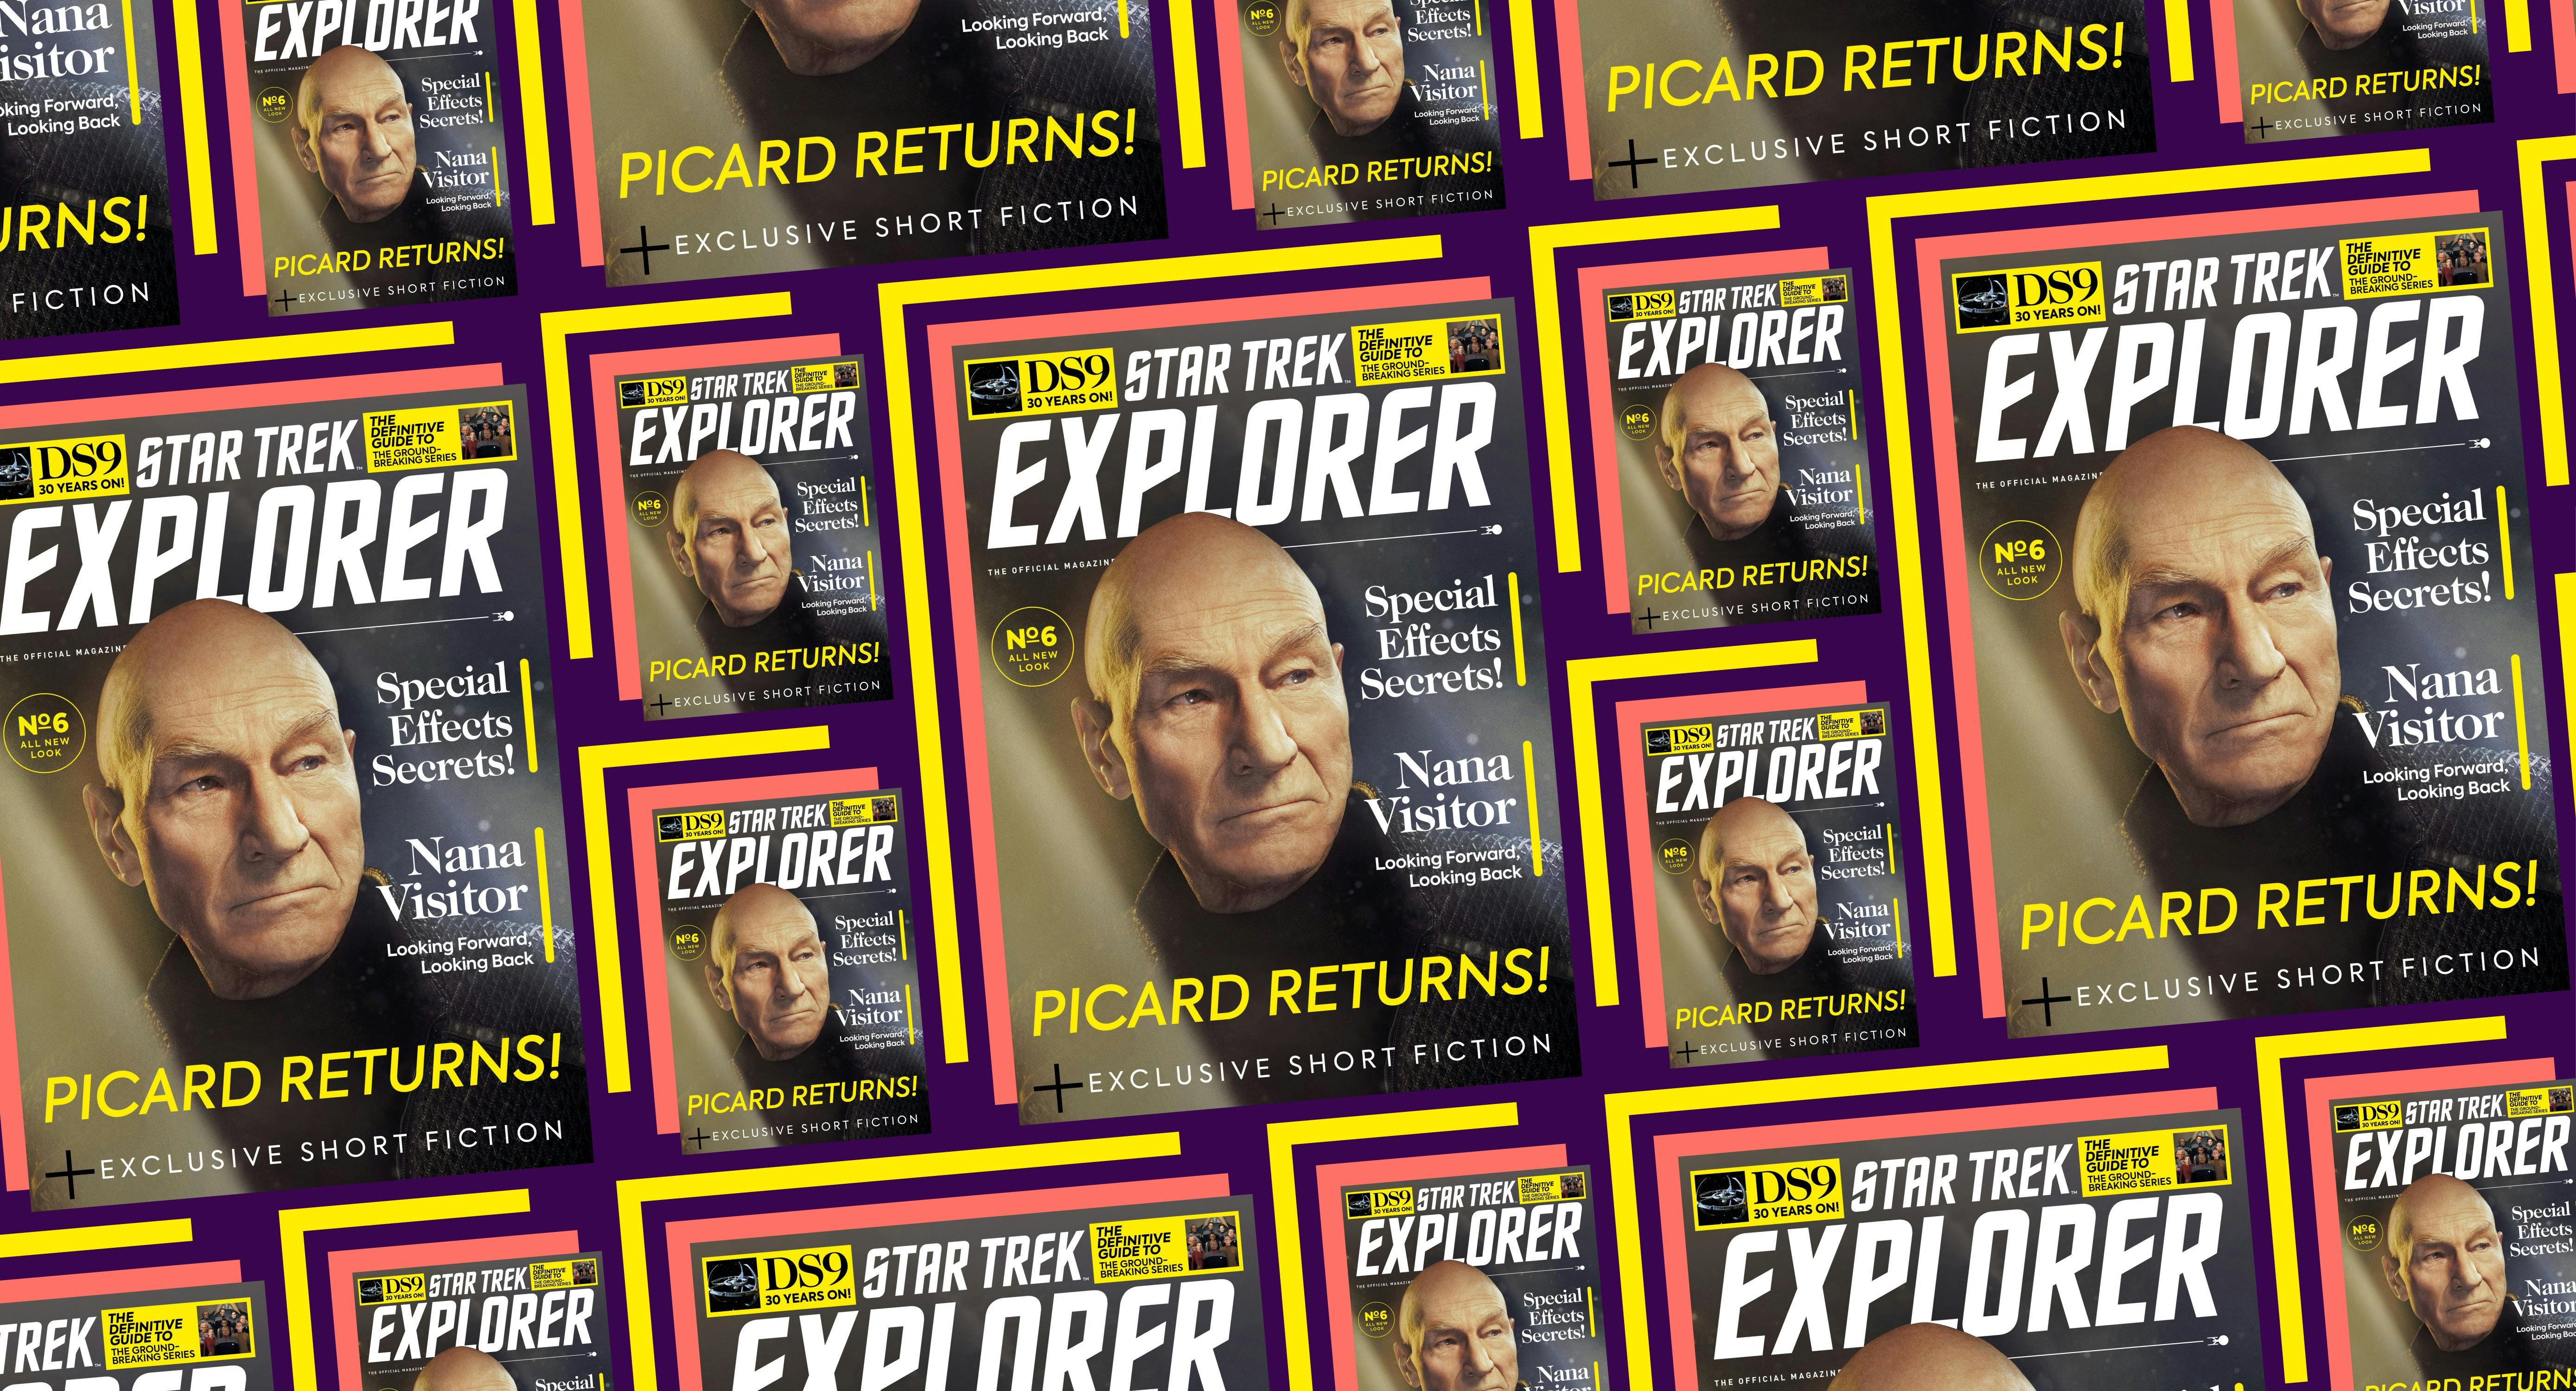 Illustrated banner featuring the Star Trek Explorer #6 cover with Jean-Luc Picard